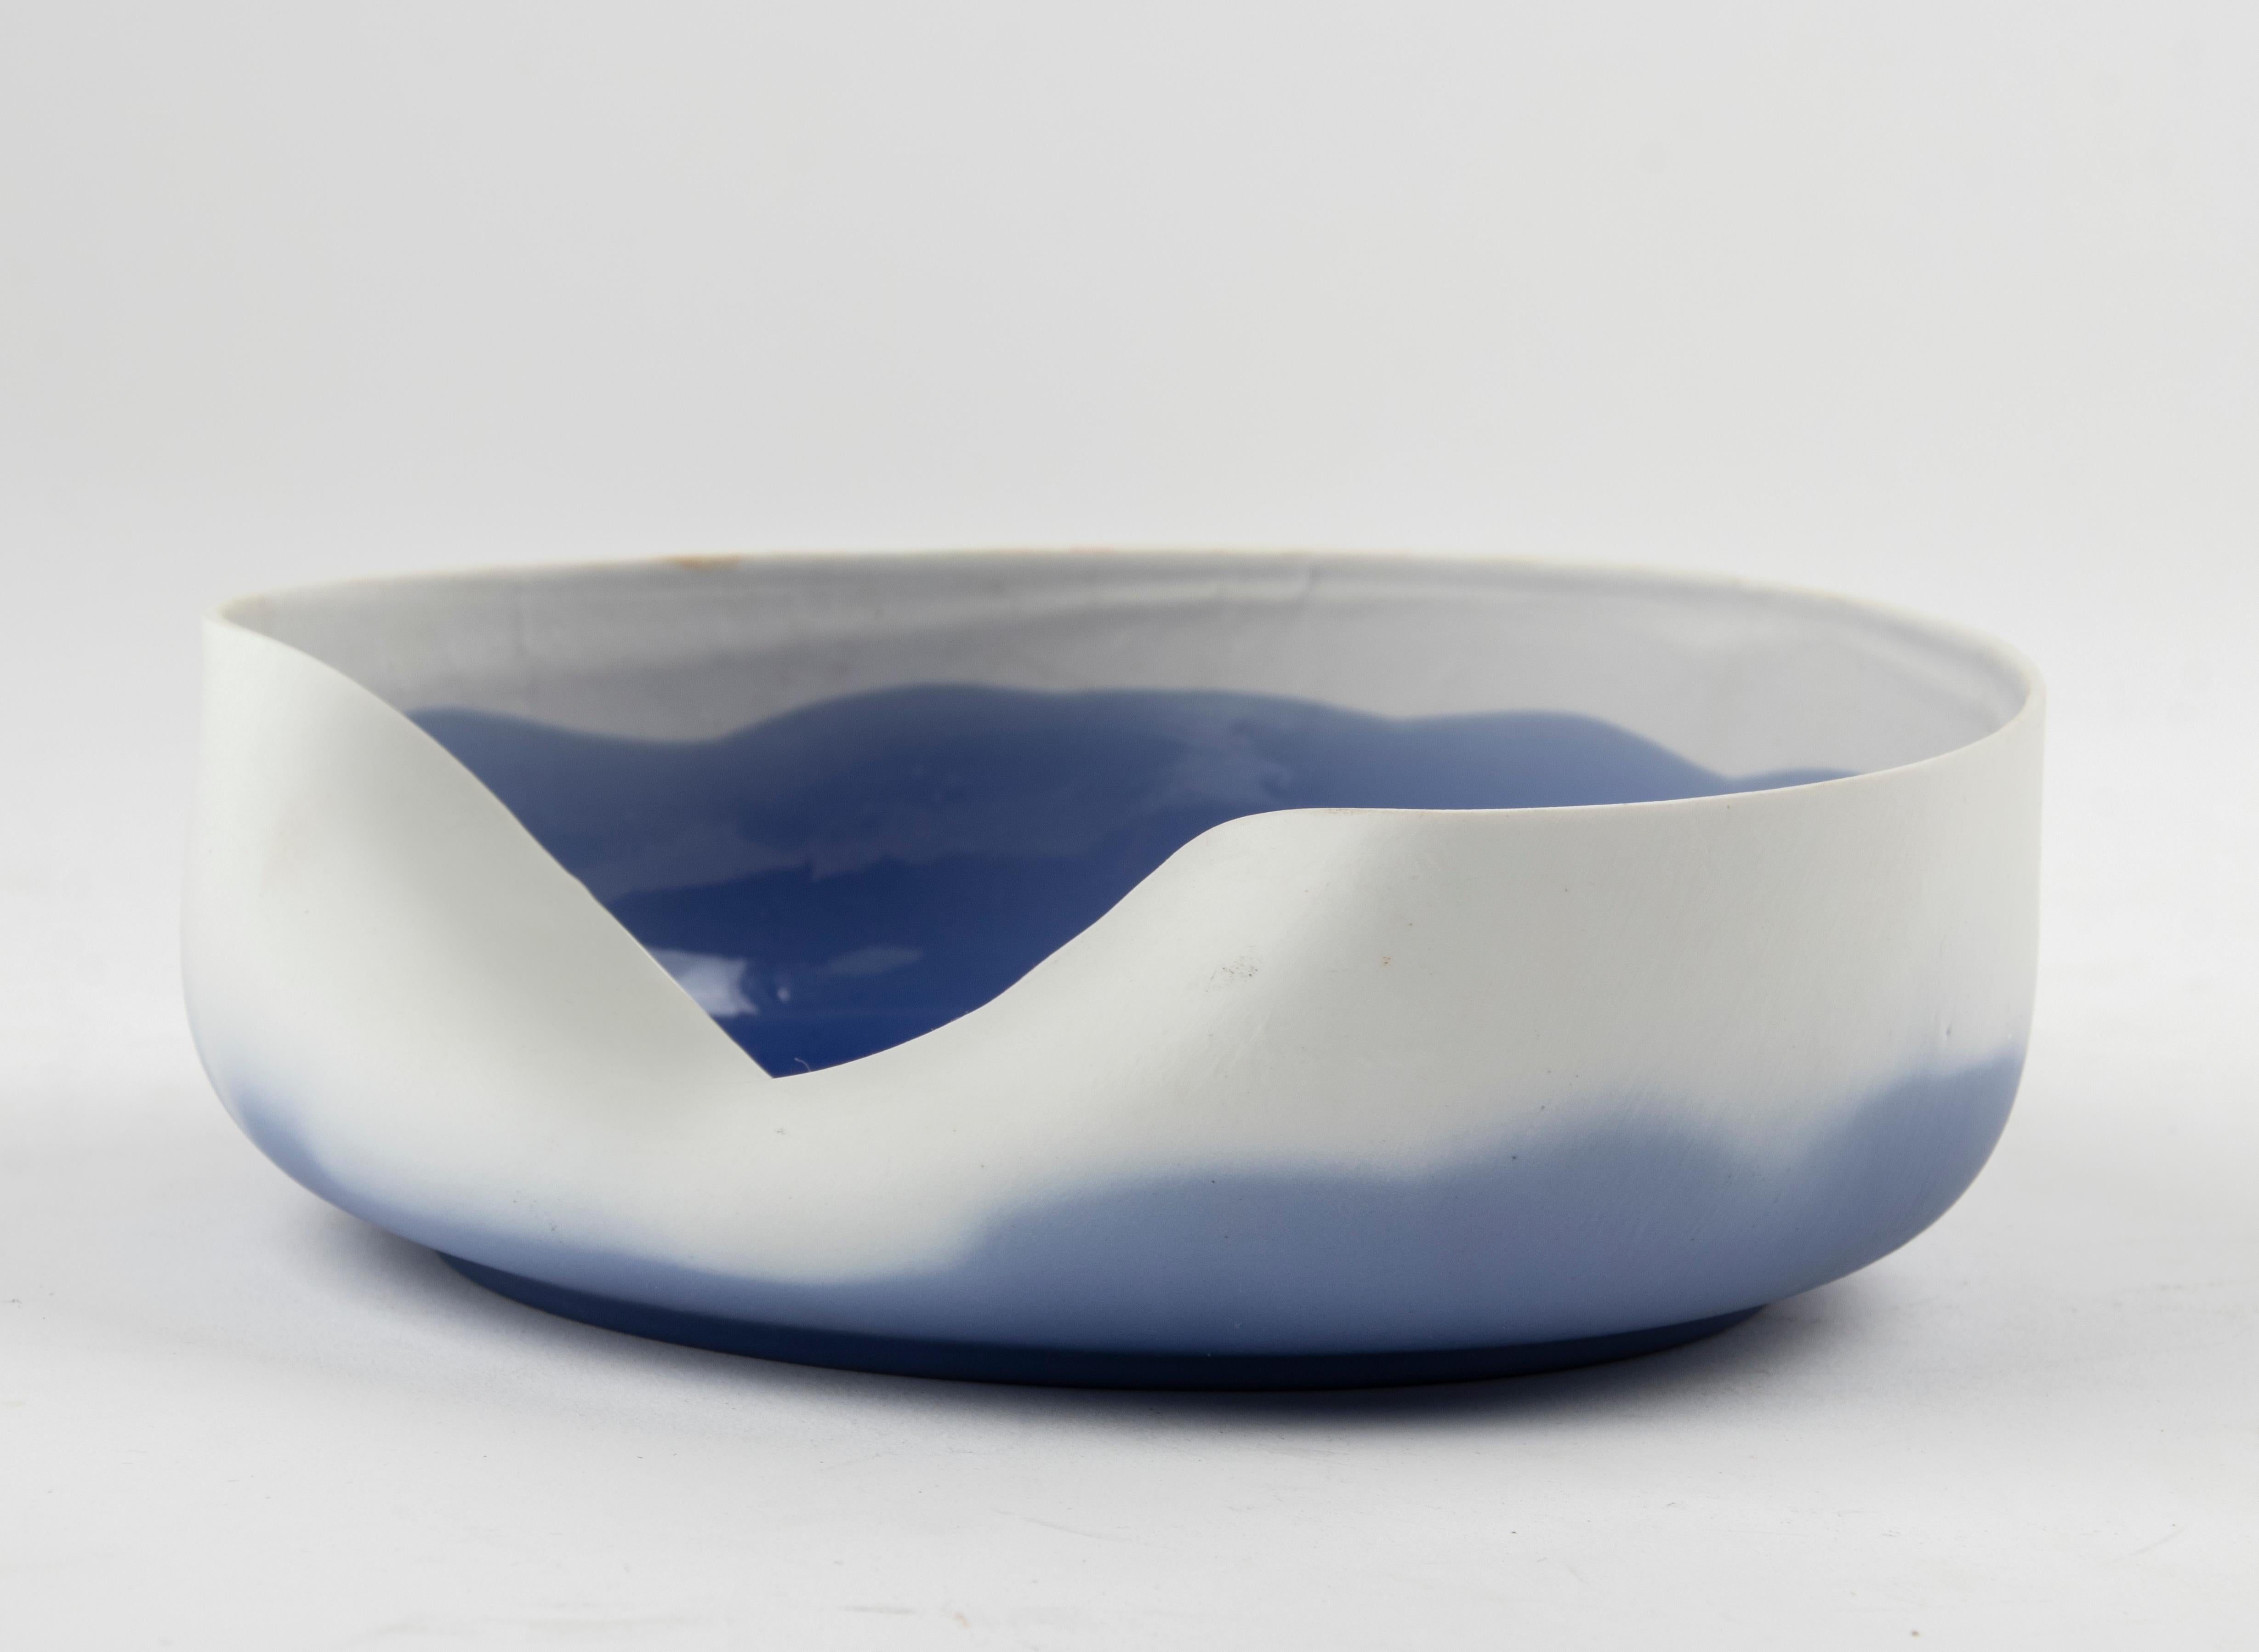 Modern porcelain bowl by the Belgian ceramist Piet Stockmans. The bowl is partly unglazed porcelain, with a blue, lavender-like colour, characteristic of Stockmans' work. The bowl is signed and also dated, 1991. In very good condition.
Stockmans'